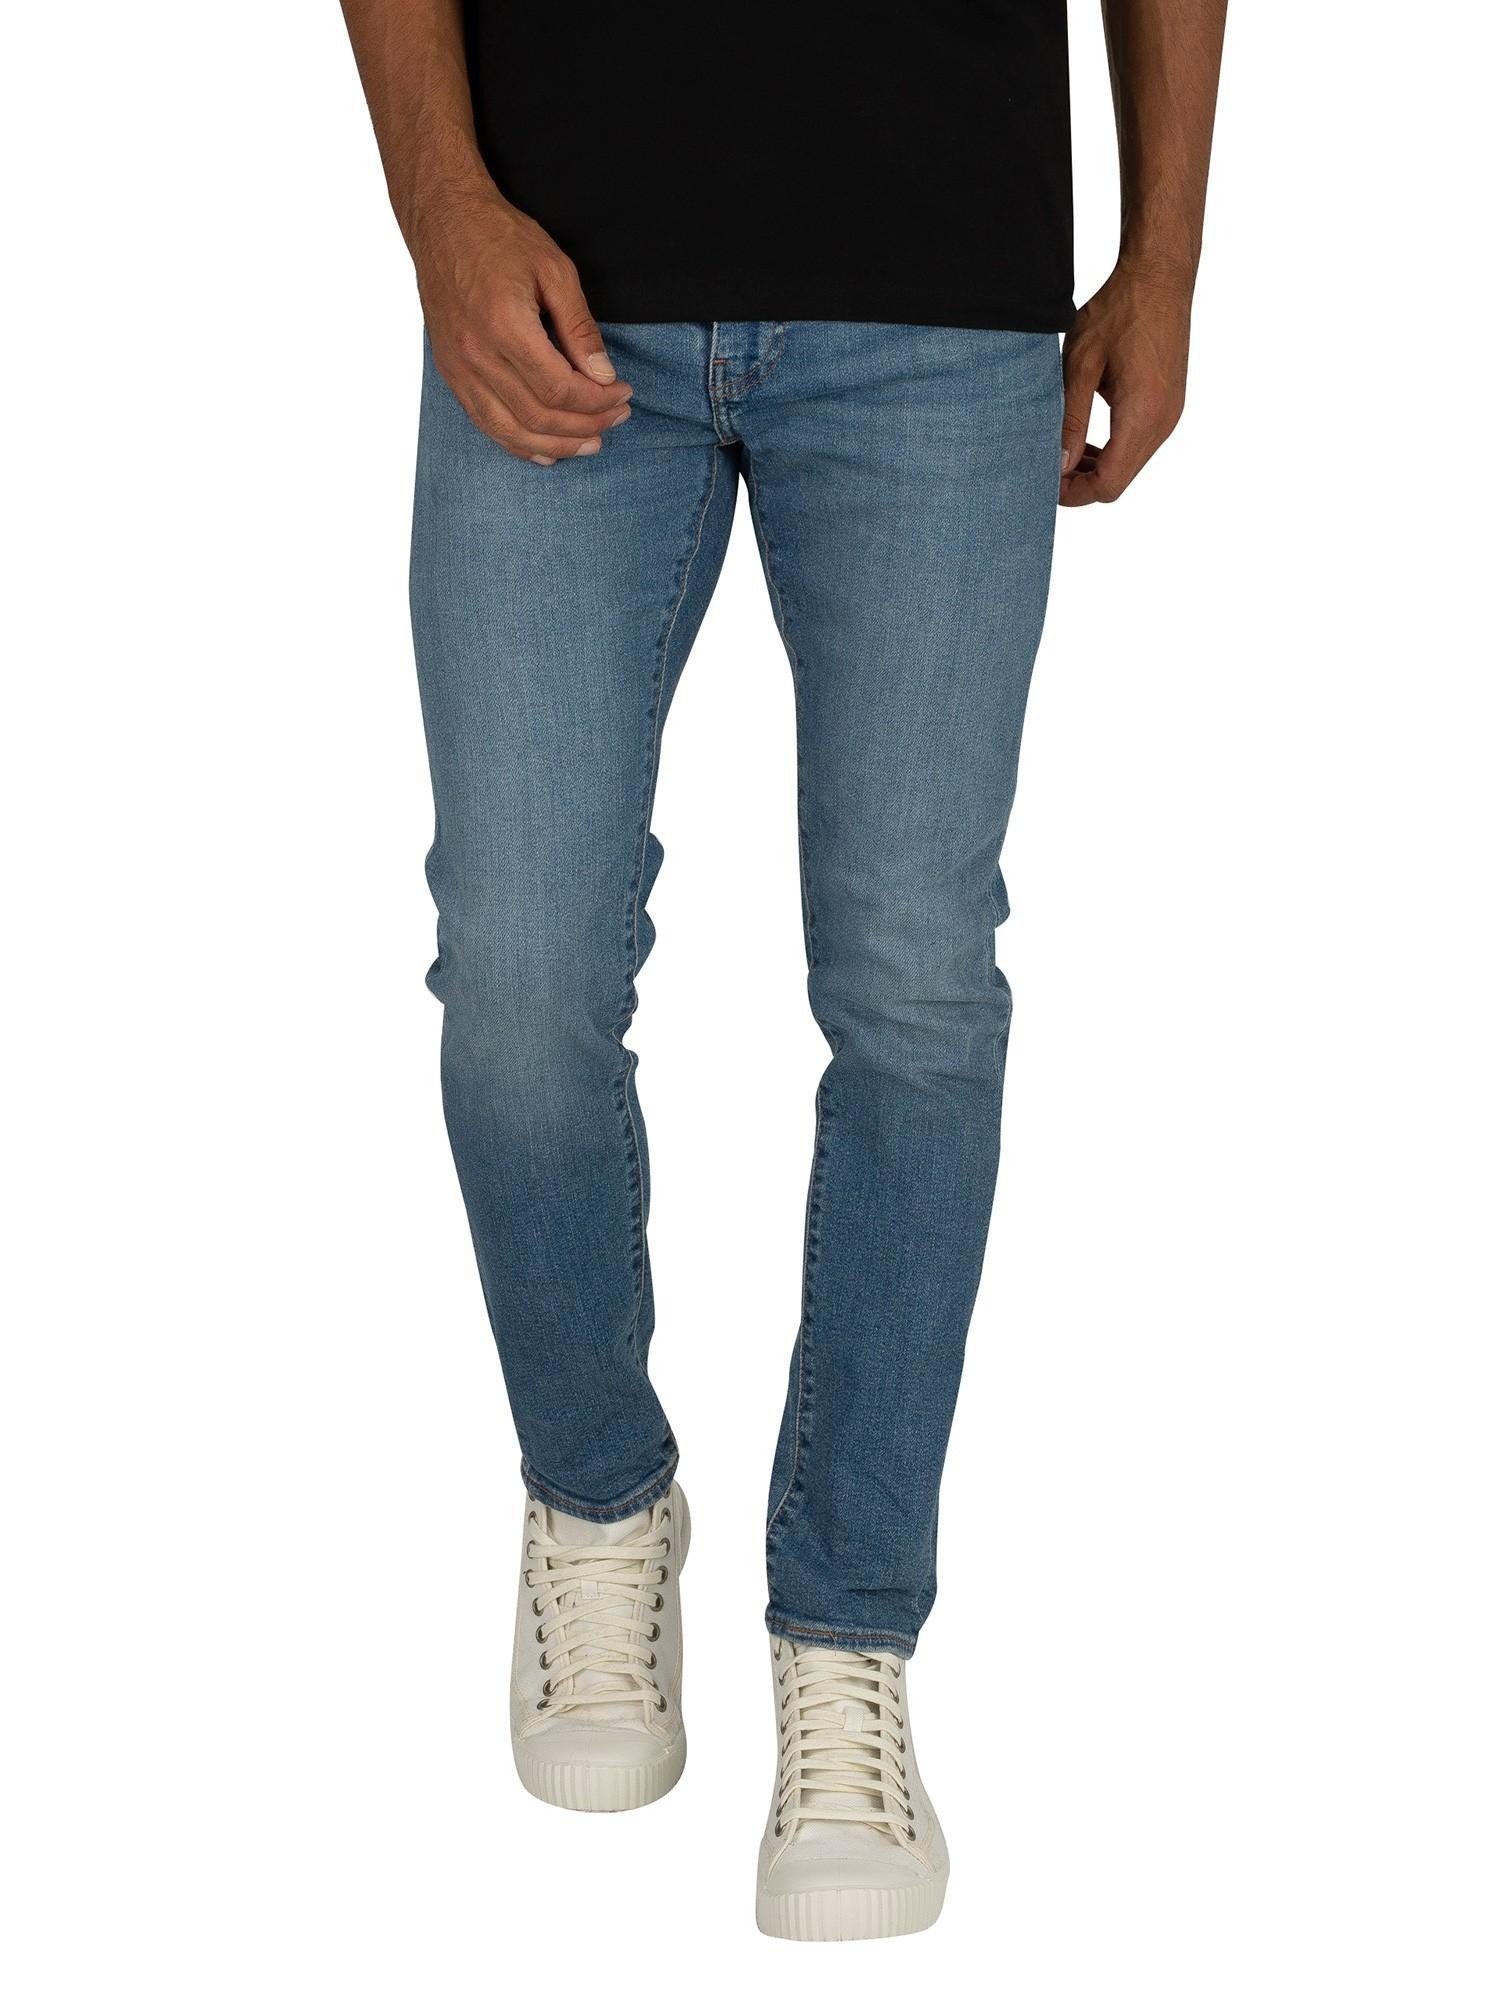 Levi's Denim 519 Extreme Skinny Fit Jeans in Blue for Men - Lyst